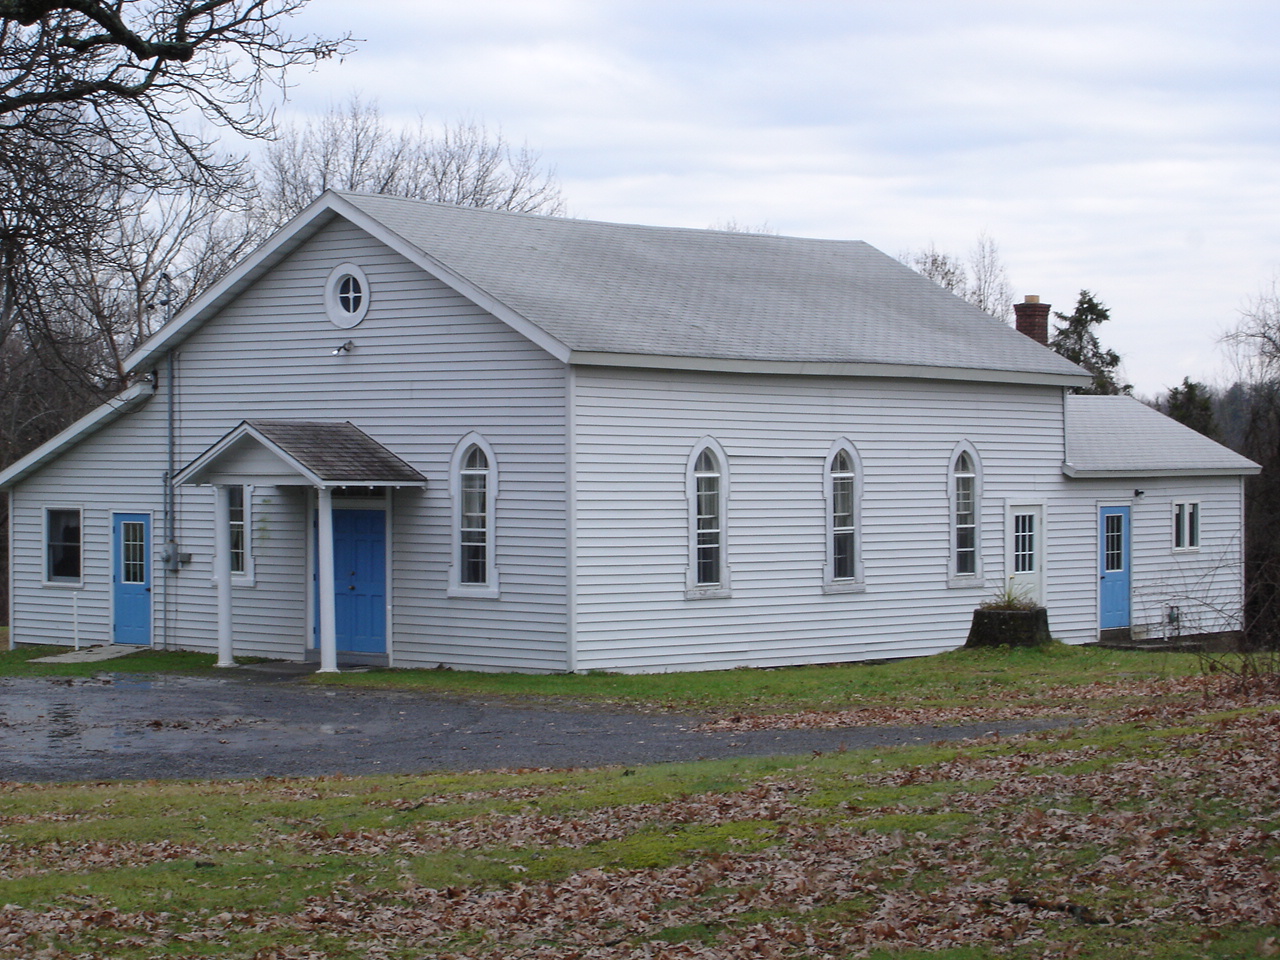 [ The Pine Grove Church in its current location ]